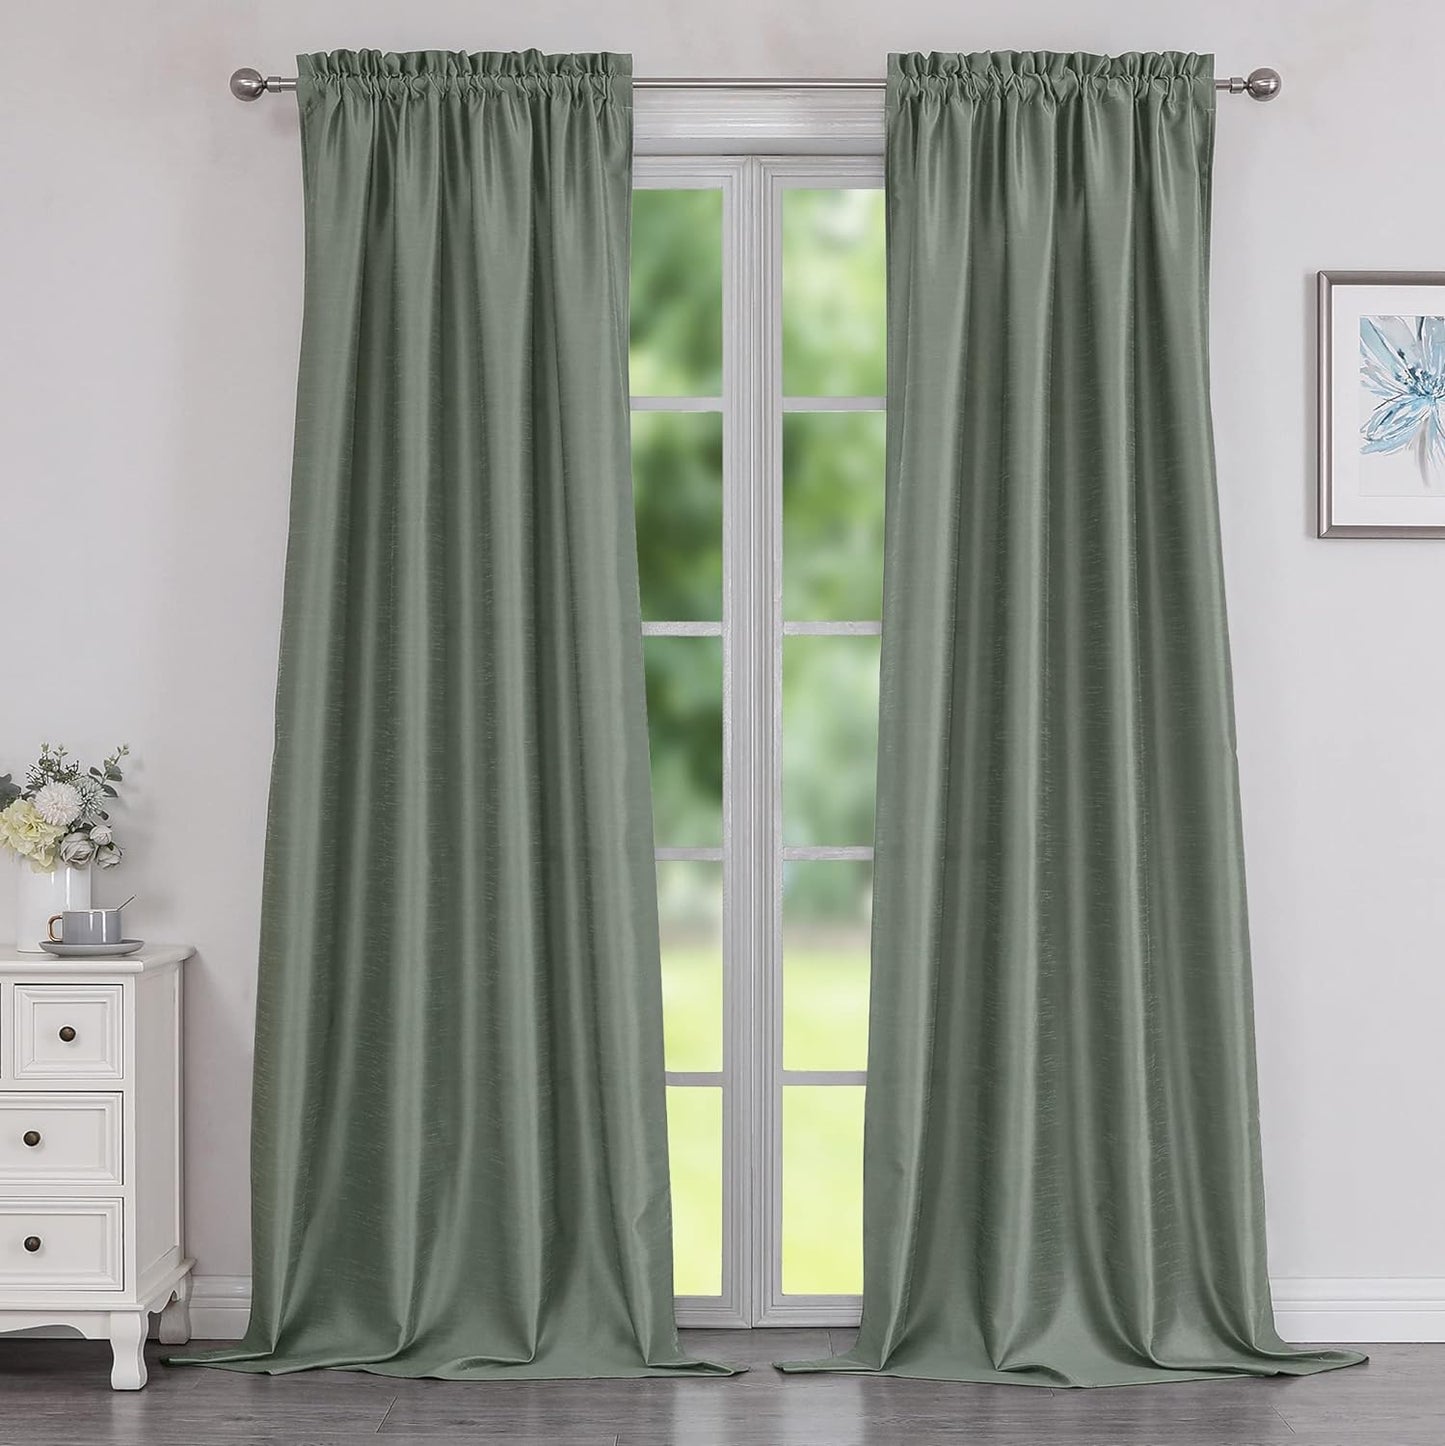 Chyhomenyc Uptown Sage Green Kitchen Curtains 45 Inch Length 2 Panels, Room Darkening Faux Silk Chic Fabric Short Window Curtains for Bedroom Living Room, Each 30Wx45L  Chyhomenyc Sage Green 2X40"Wx96"L 